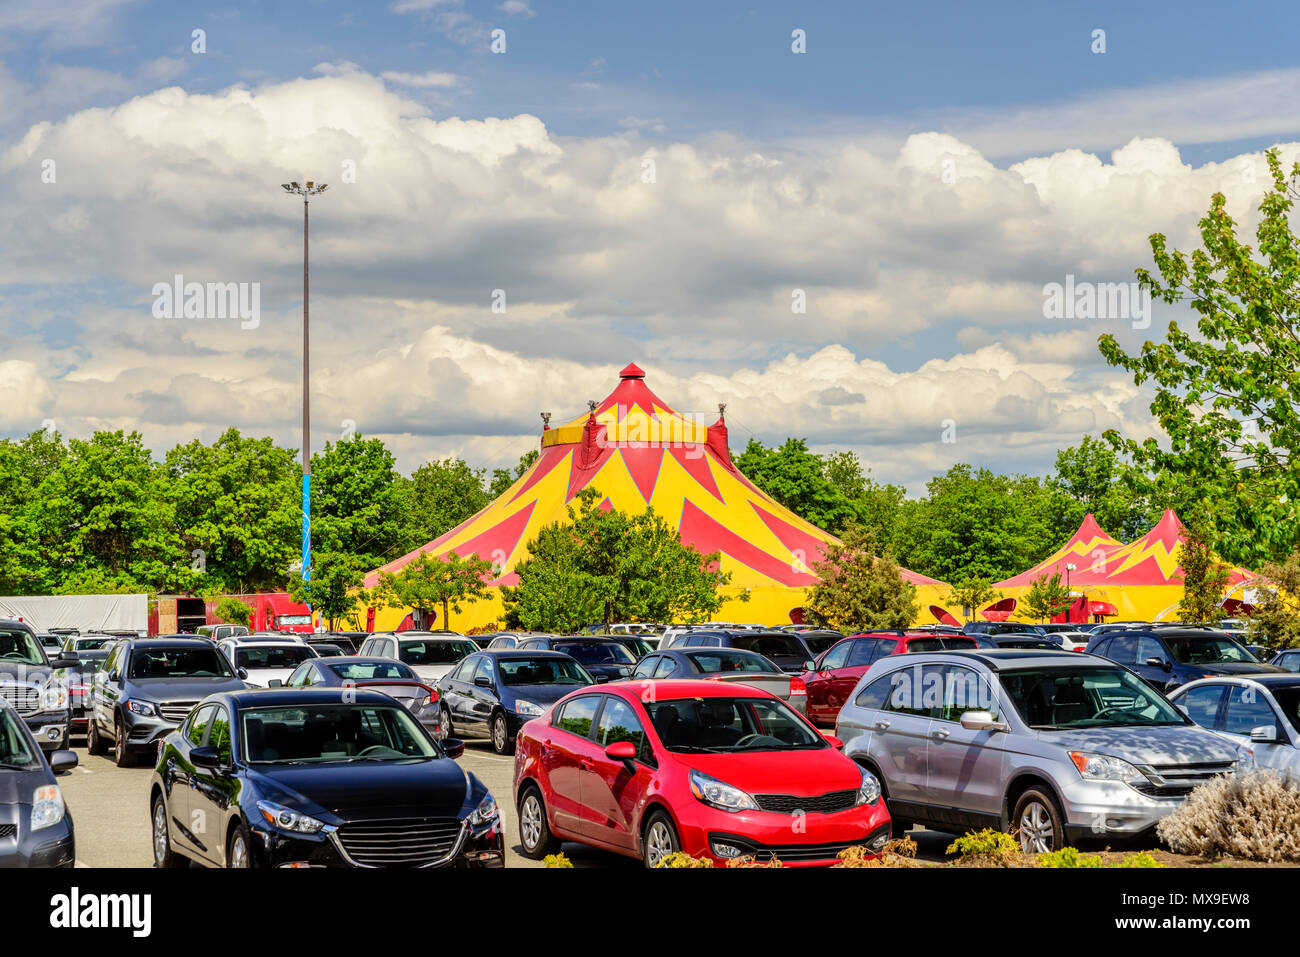 Domes of a caravan circus in the city, green trees, cars in a parking lot, a blue sky with dense clouds on a summer day Stock Photo